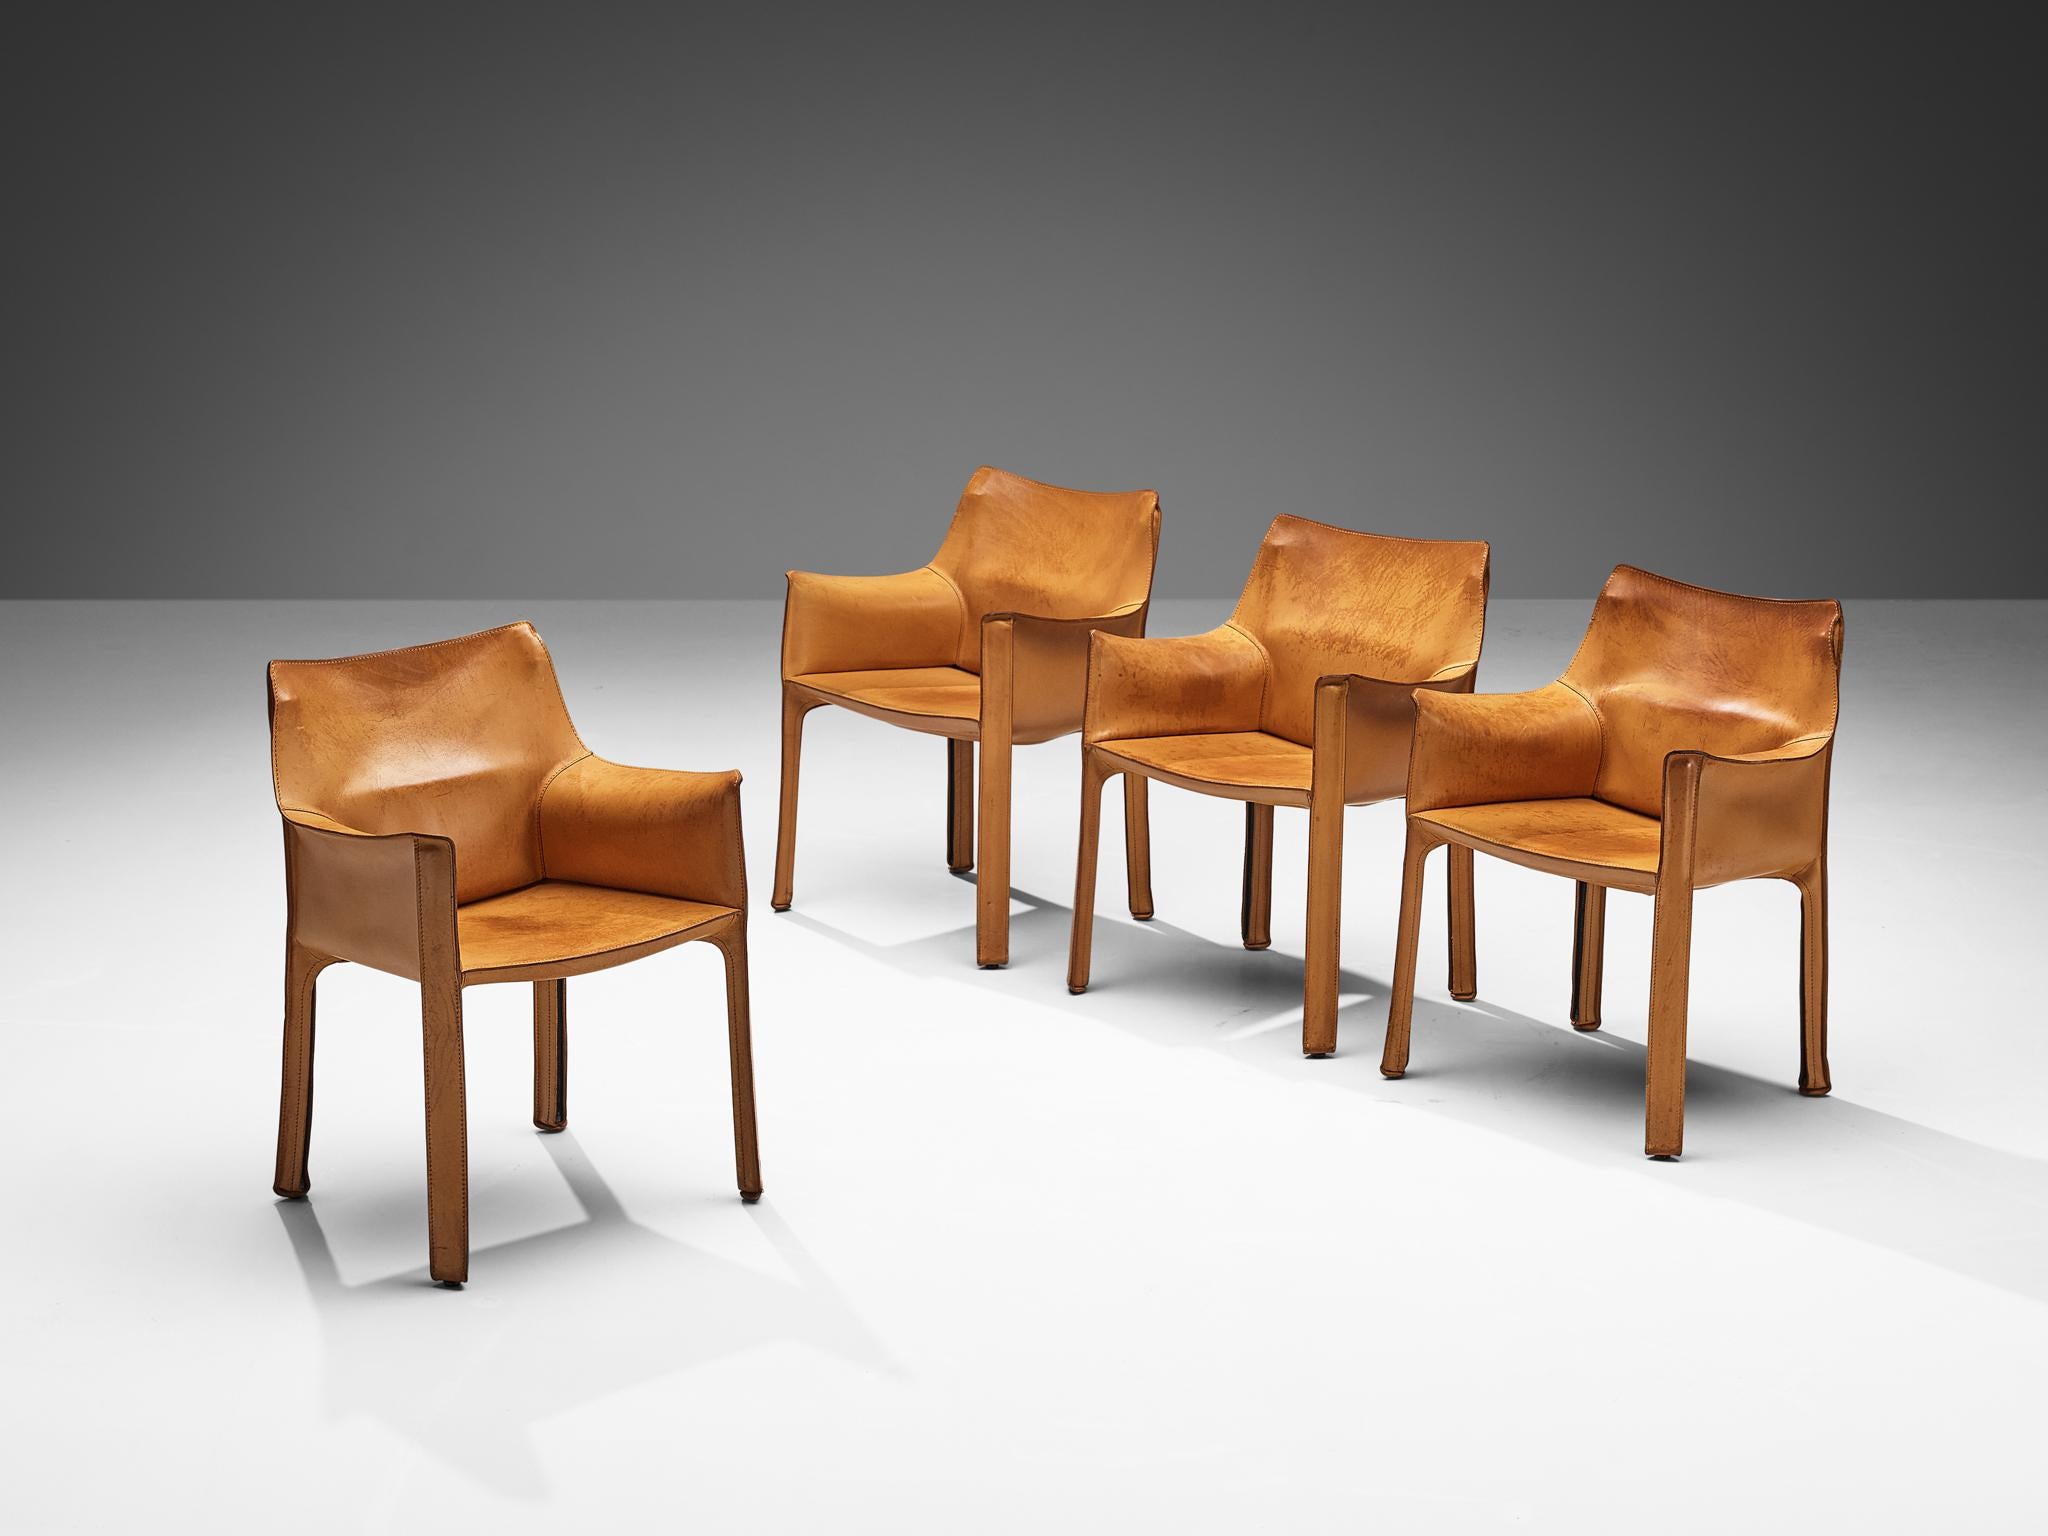 Mario Bellini for Cassina, set of four armchairs model 'CAB 413', leather, Italy, design 1979

The iconic ‘CAB’ chairs were designed by Mario Bellini in 1979. Conceptually new was the way Bellini uses leather to cover the whole chair in one